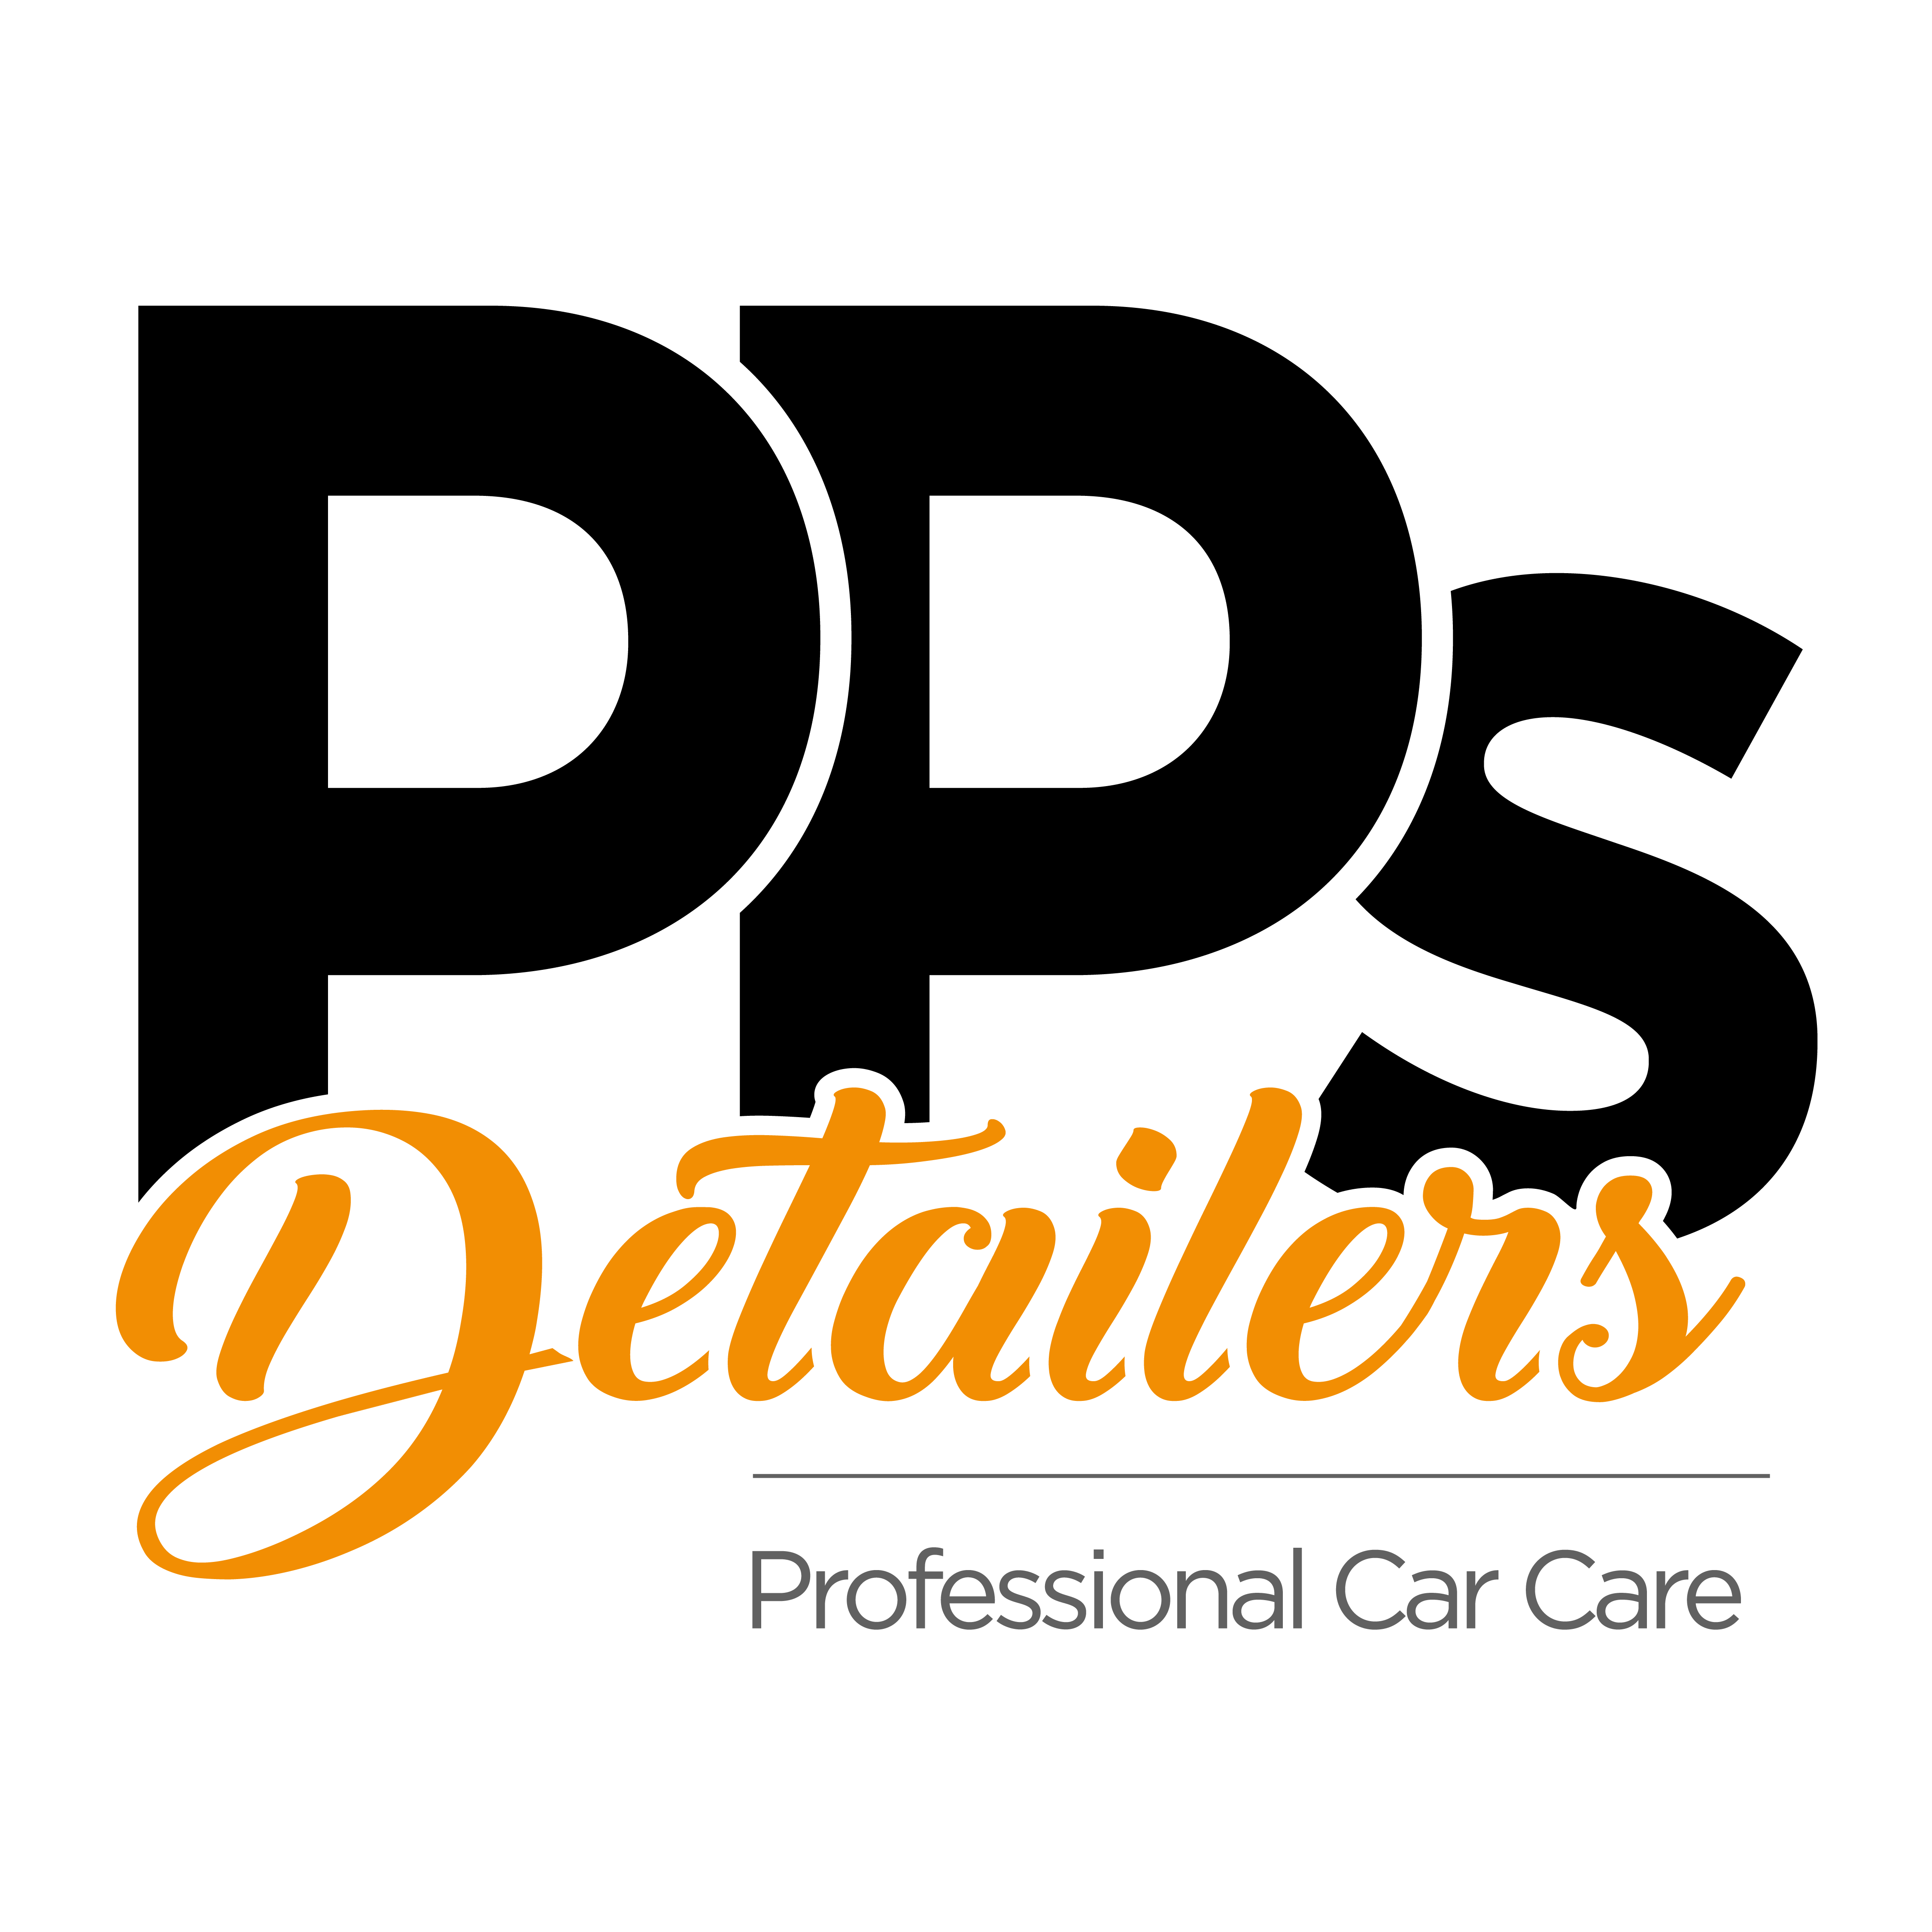 Pps detailers